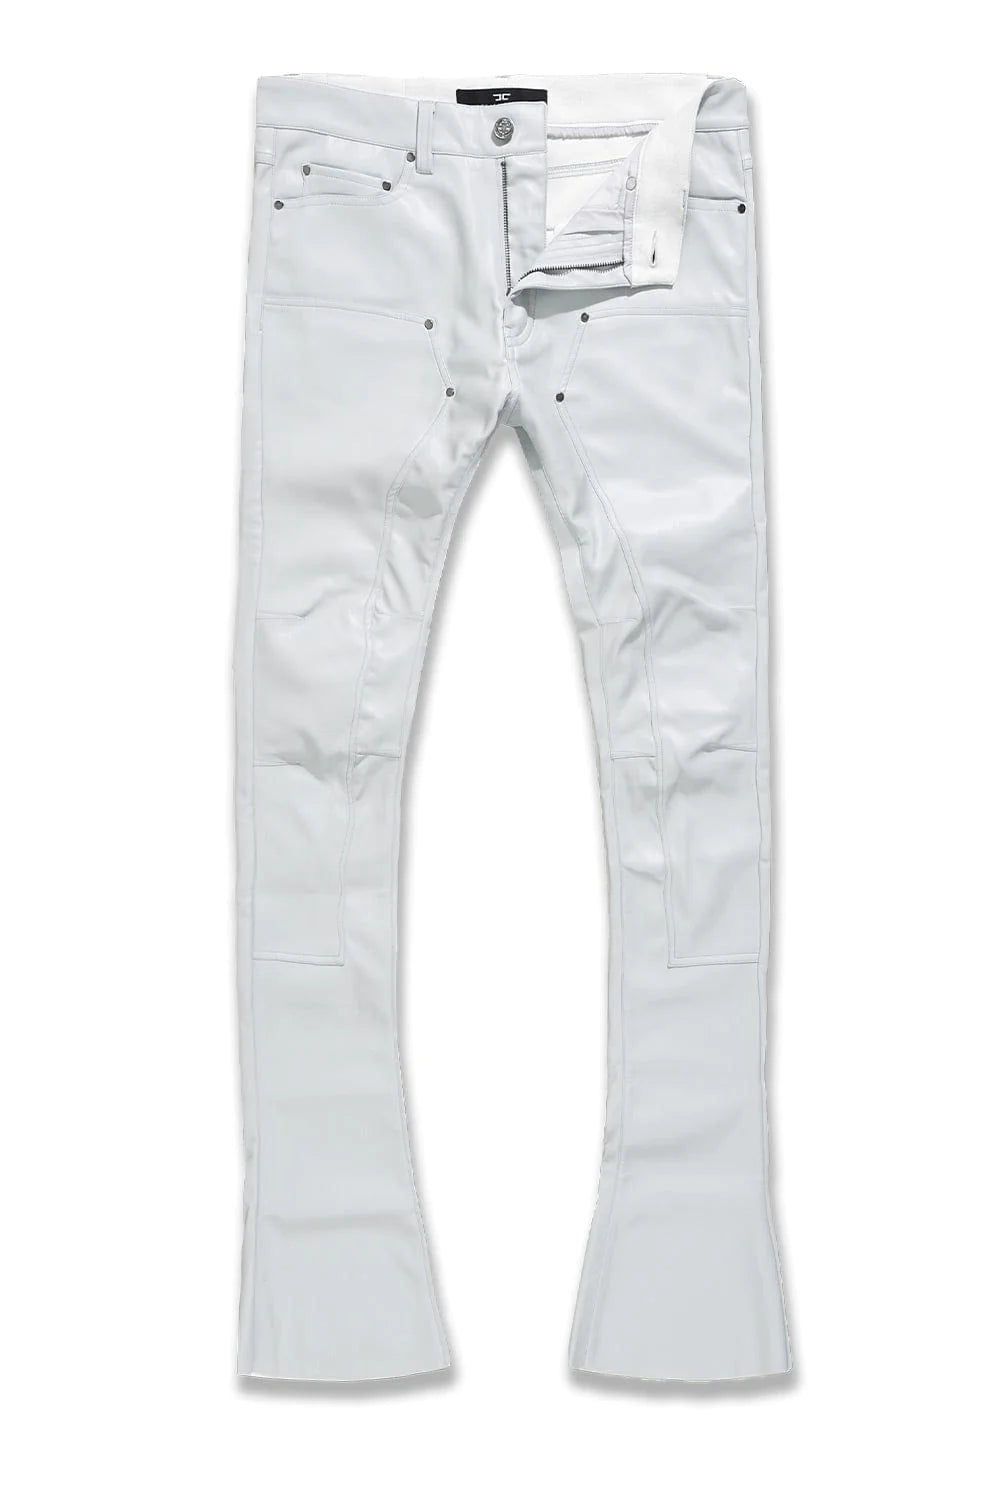 ROSS STACKED - MONTE CARLO PANTS (LIGHT GREY) JRF1135